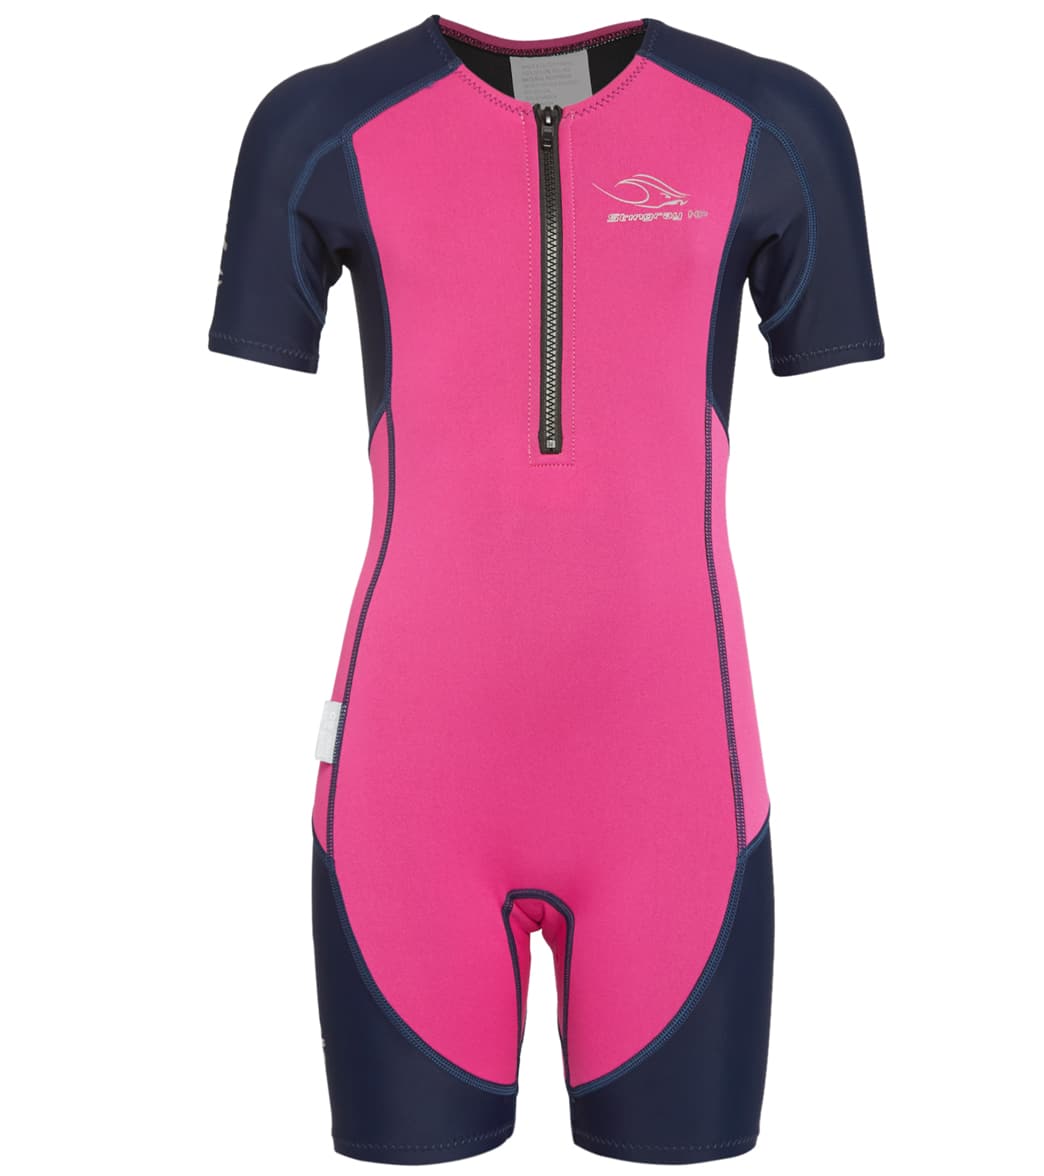 Phelps Girls' Stingray Short Sleeve Thermal Suit - Pink/Navy Blue 8Y - Swimoutlet.com